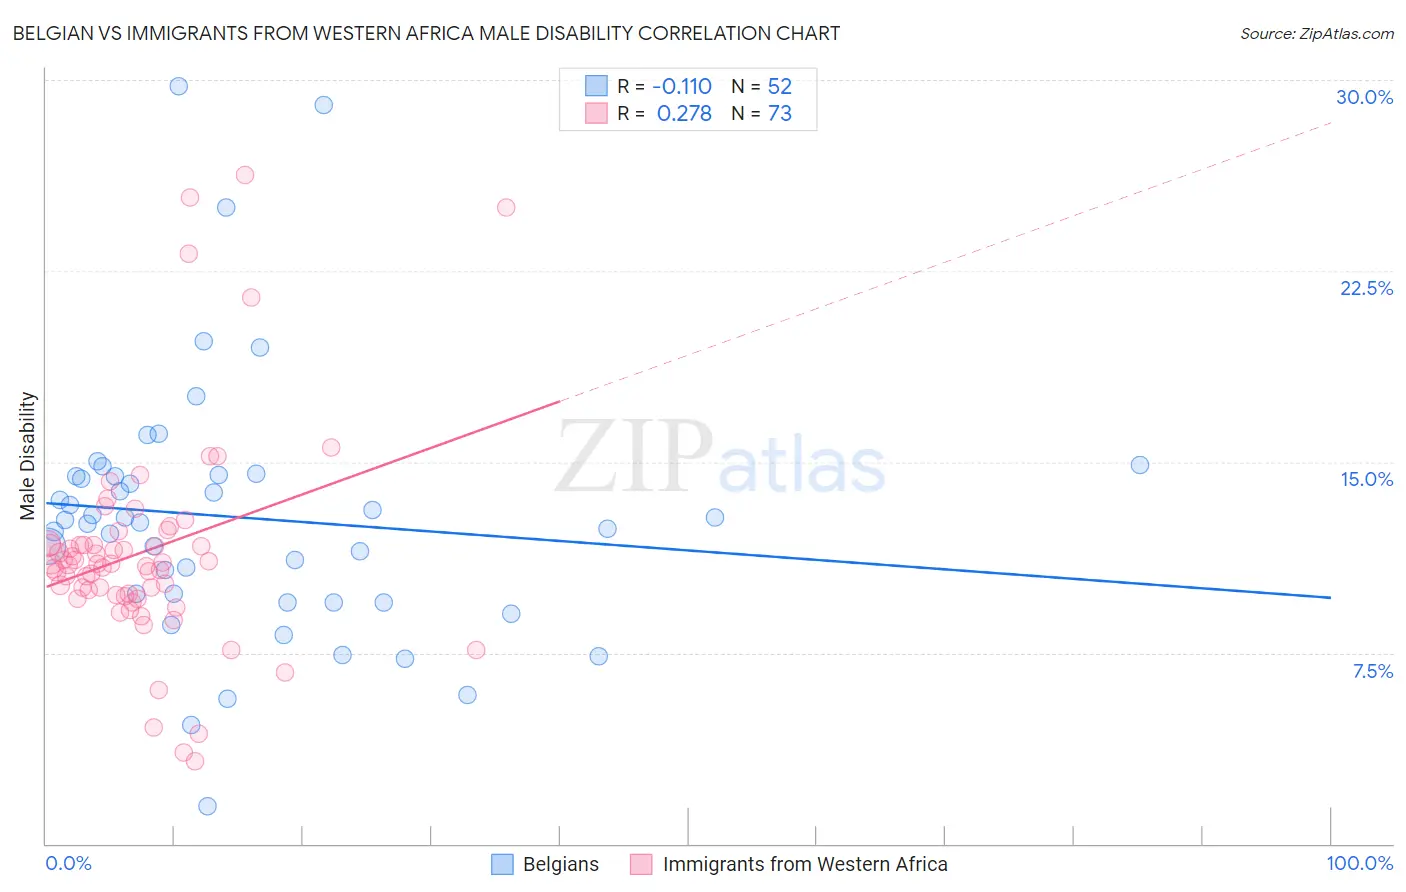 Belgian vs Immigrants from Western Africa Male Disability